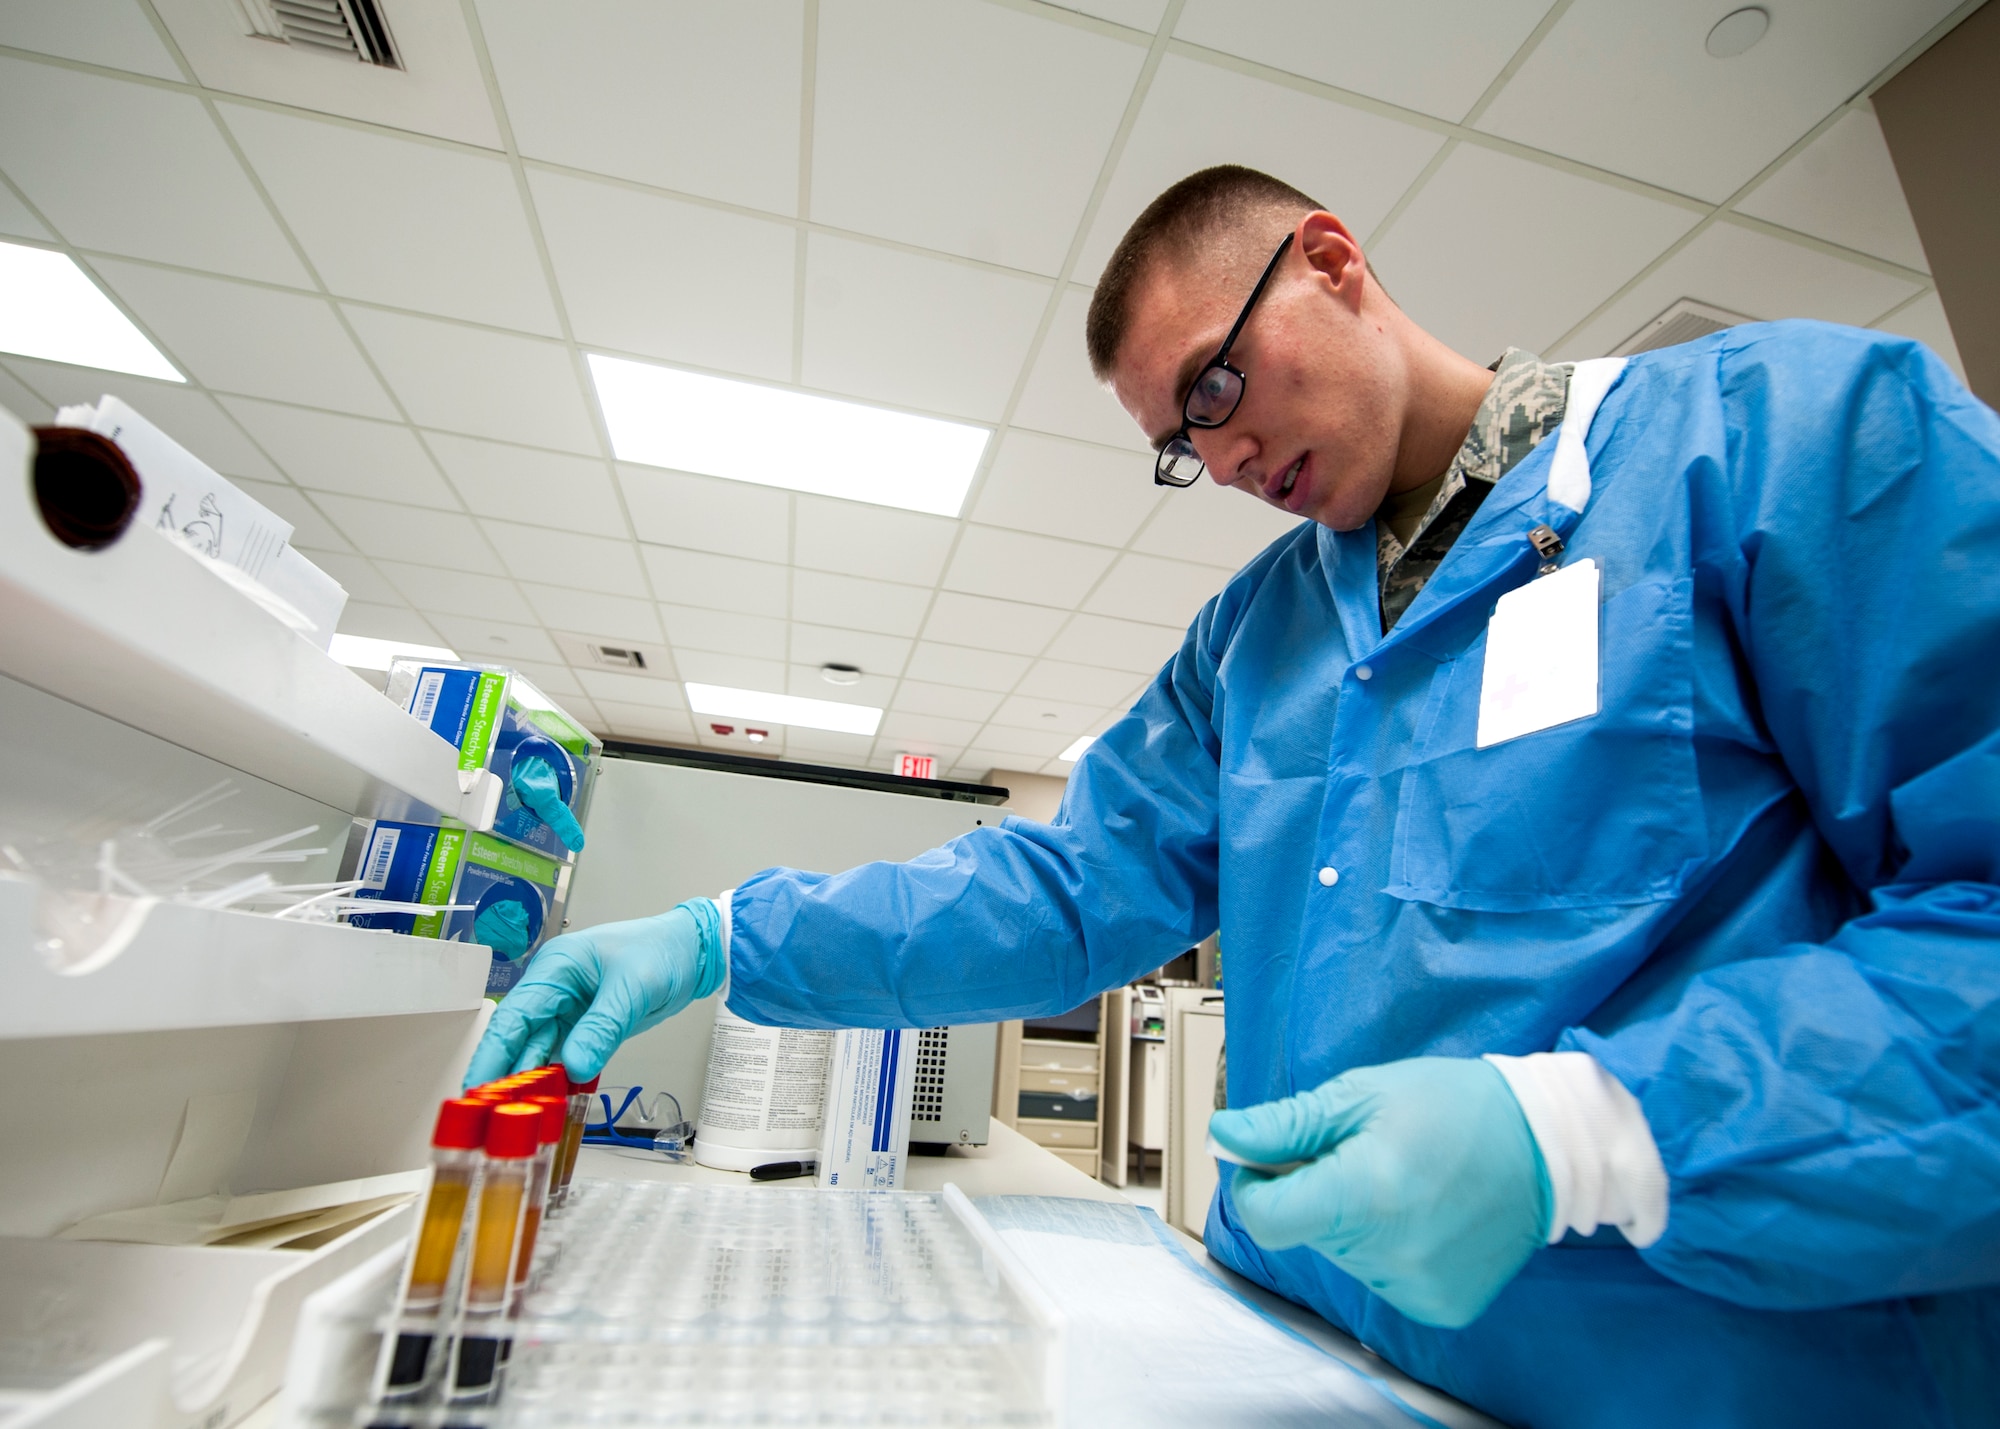 Senior Airman David Gehring, 92nd Medical Support Squadron medical laboratory technician, conducts lab work Dec. 1, 2015, Fairchild Air Force Base, Wash. Quality control serum has pre-determined results in order to determine the result range of the analyzer being used. (U.S. Air Force illustration/Airman 1st Class Sean Campbell)